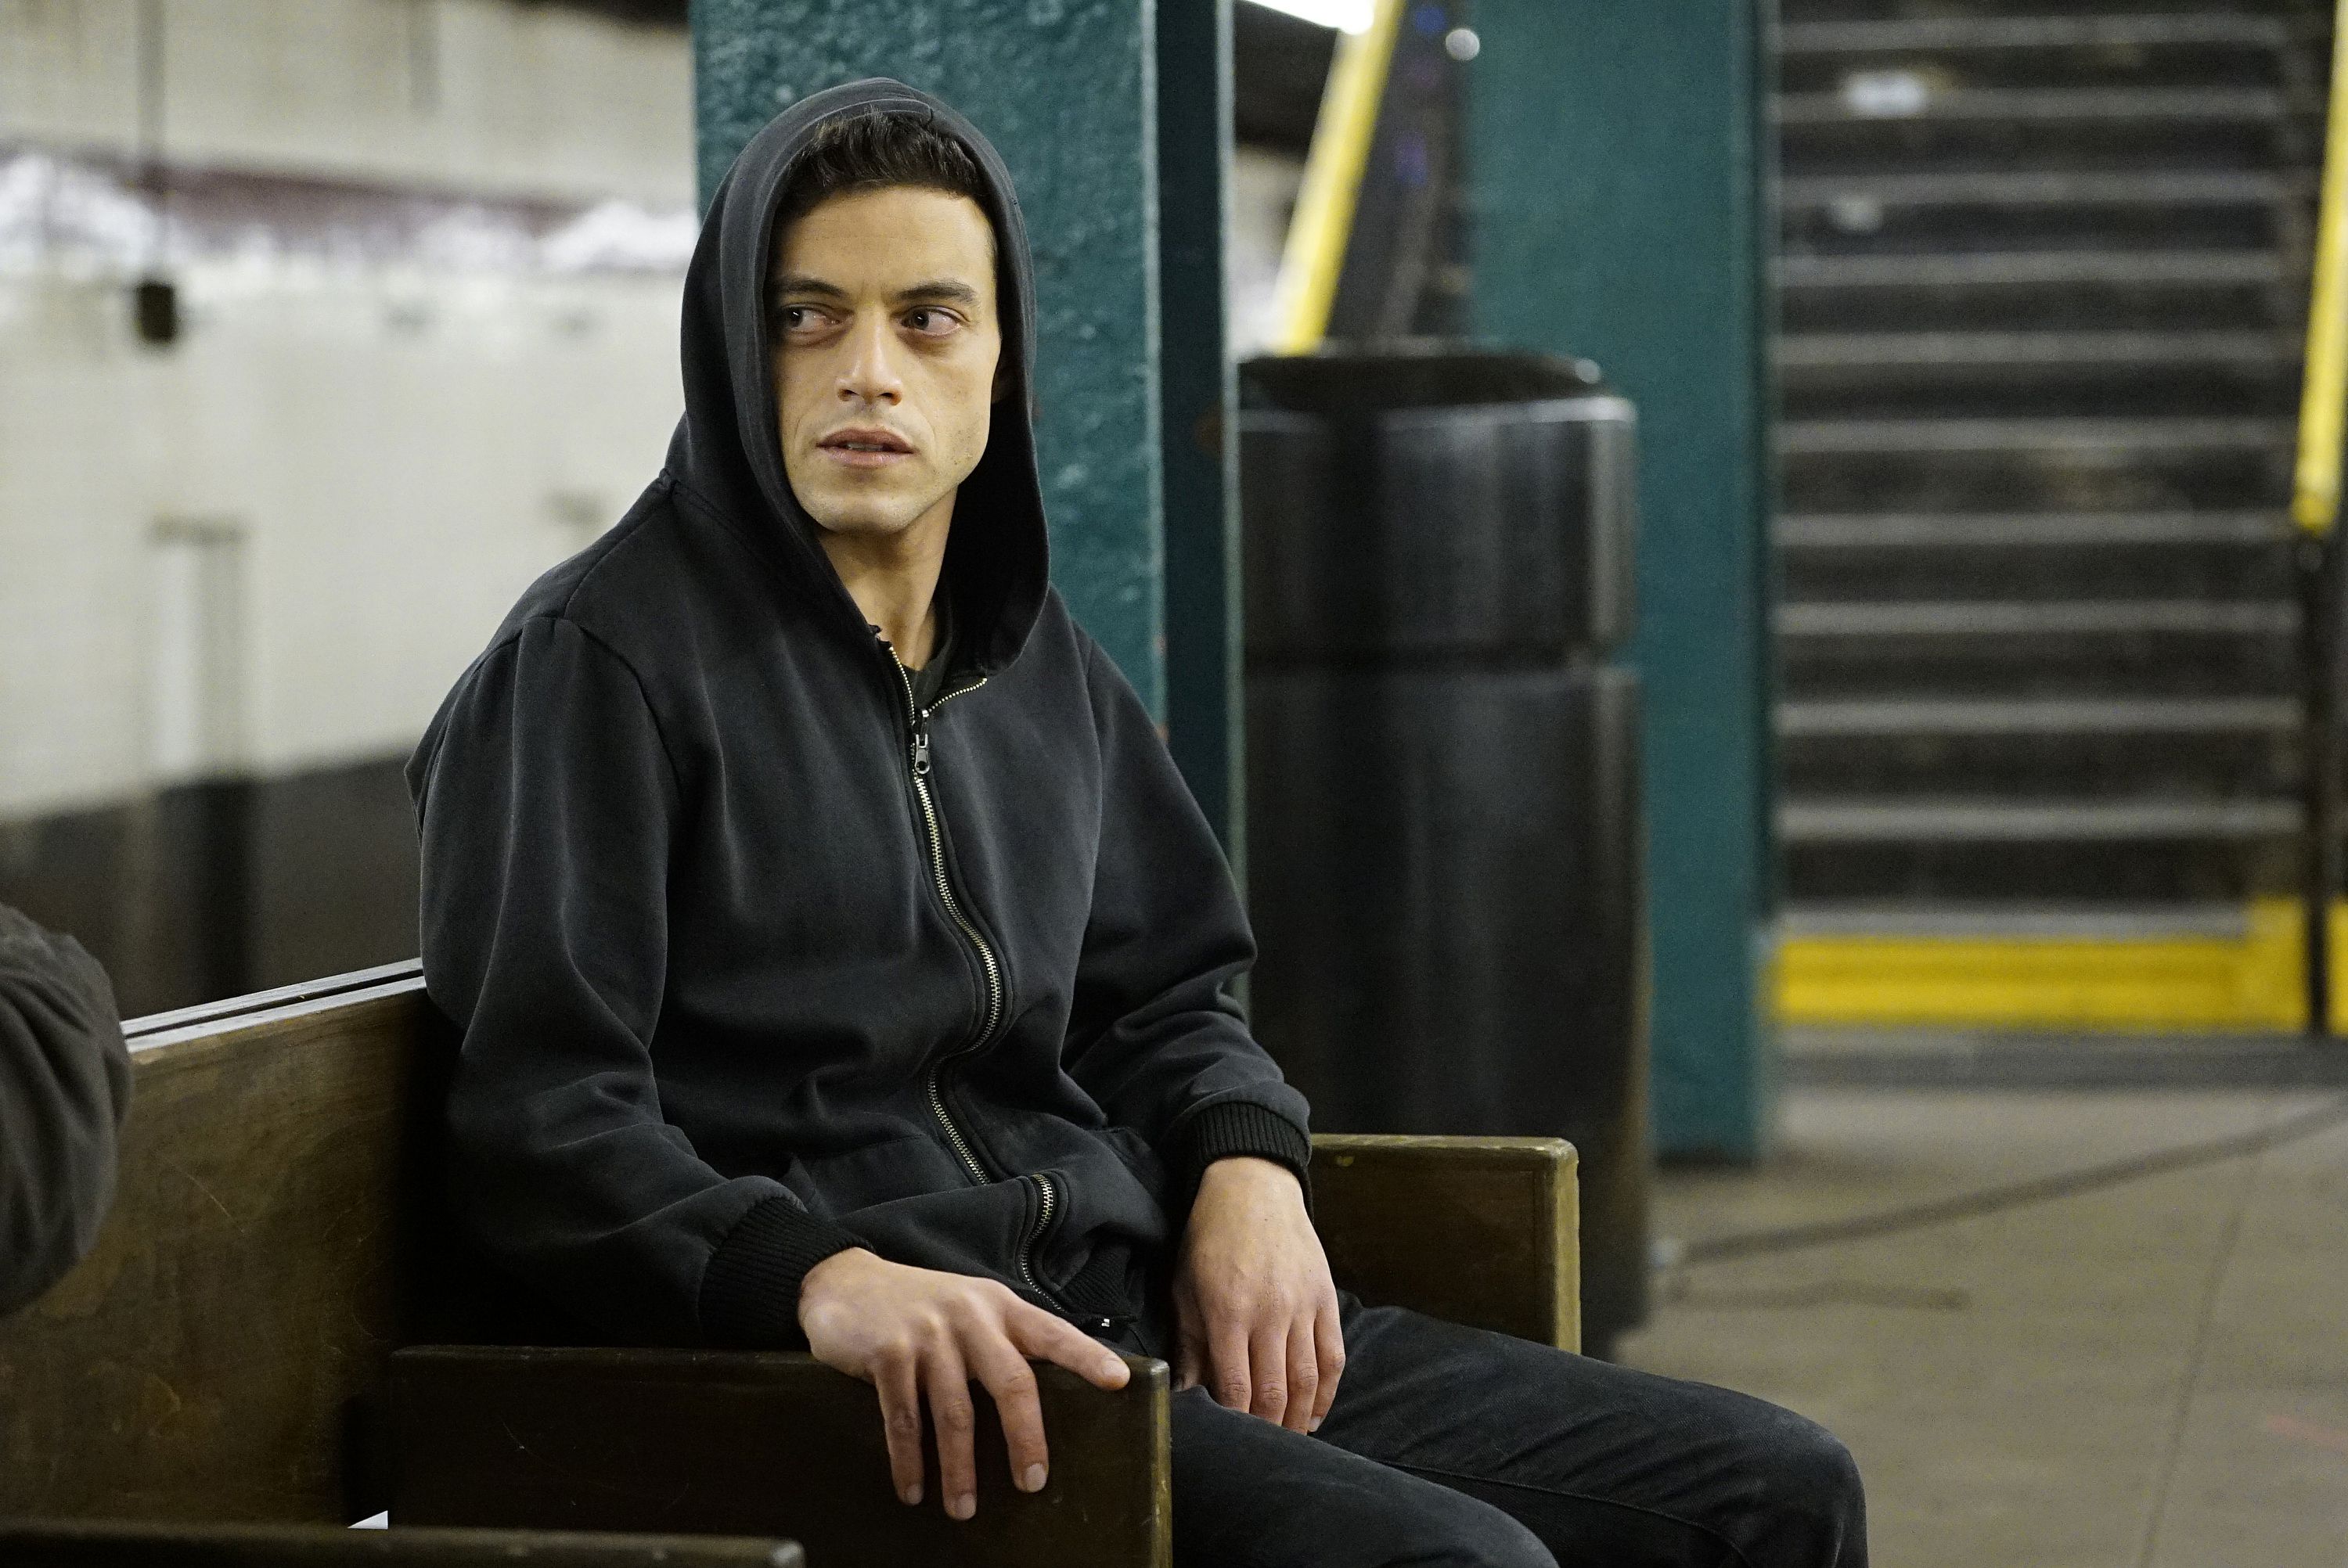 diagonal ret chokerende Mr. Robot free live stream: How to watch online without cable - nj.com